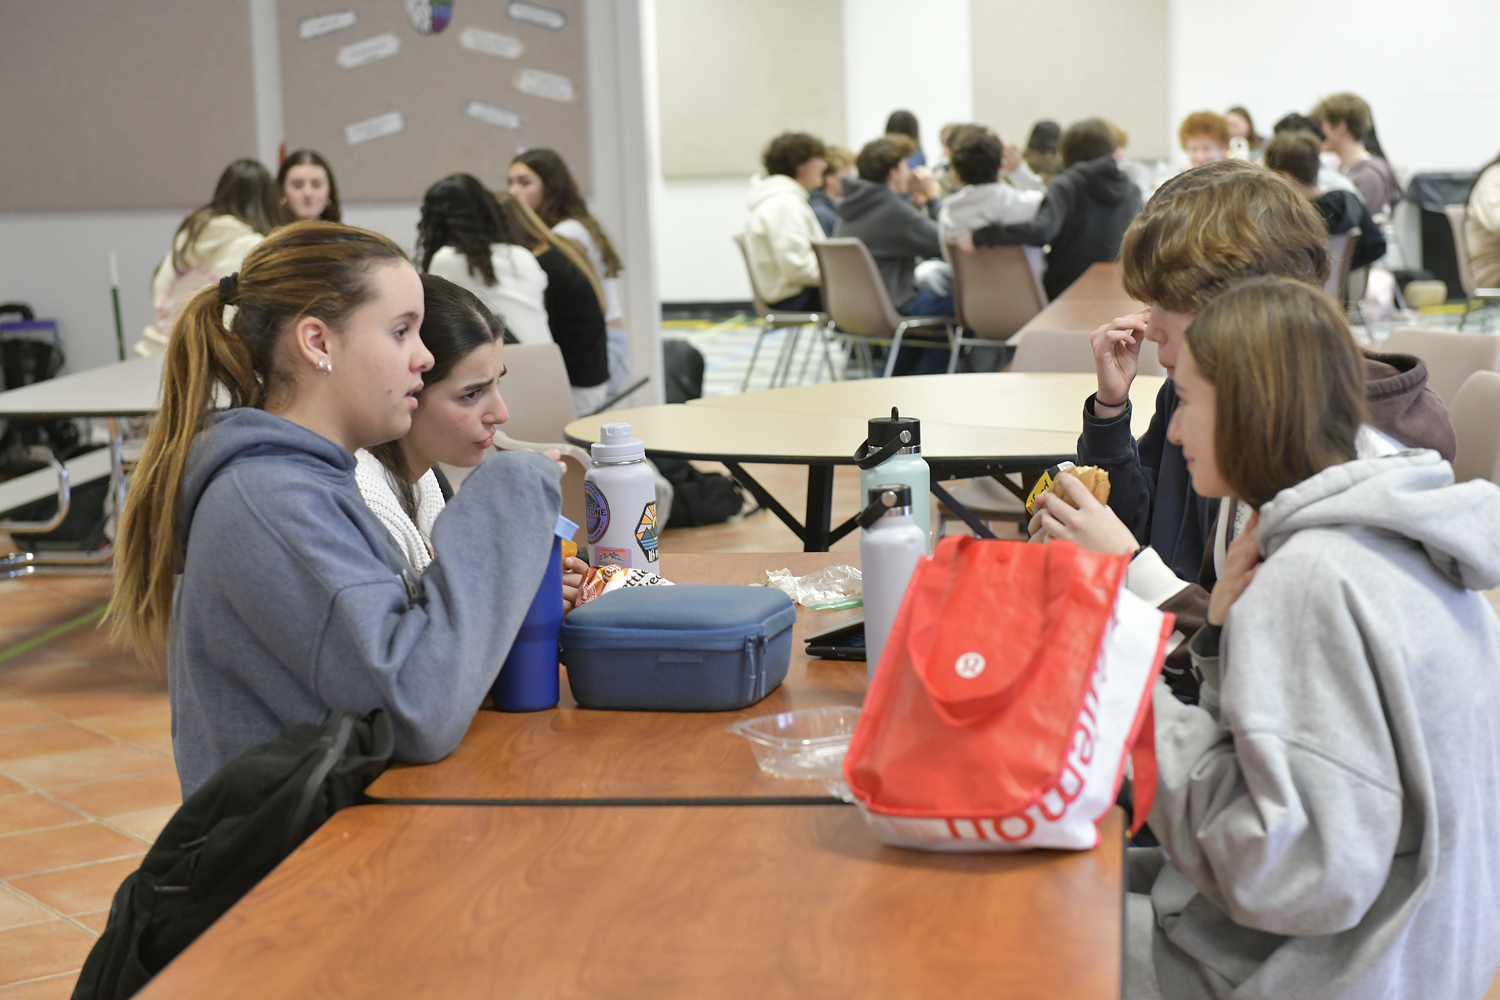 Students at Pierson High chat and enjoy their lunches instead of checking their phones.  DANA SHAW